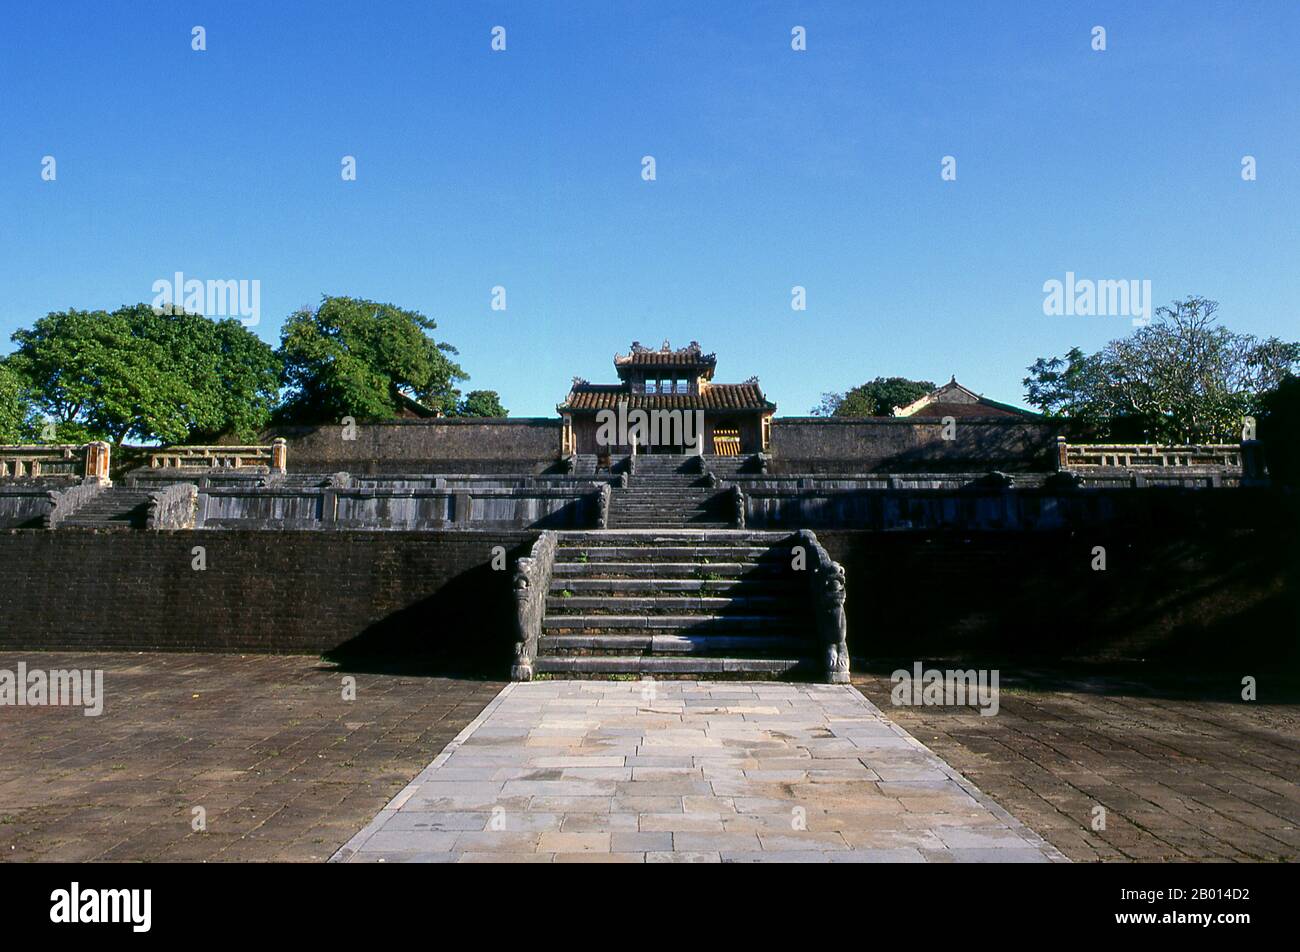 Vietnam: Staircase and entrance to the Tomb of Emperor Thieu Tri, Hue.  Nguyễn Phúc Miên Tông (6 June 1807 – 4 November 1847) was the third emperor of the Vietnamese Nguyễn Dynasty taking the era name of Thiệu Trị. He was the eldest son of Emperor Minh Mạng, and reigned from 14 February 1841 until his death on 4 November 1847.  Emperor Thiệu Trị was much like his father Minh Mạng and carried on his conservative policies of isolationism and the entrenchment of Confucianism. Highly educated in the Confucian tradition, Thiệu Trị had some curiosity about the West, but was very suspicious. Stock Photo